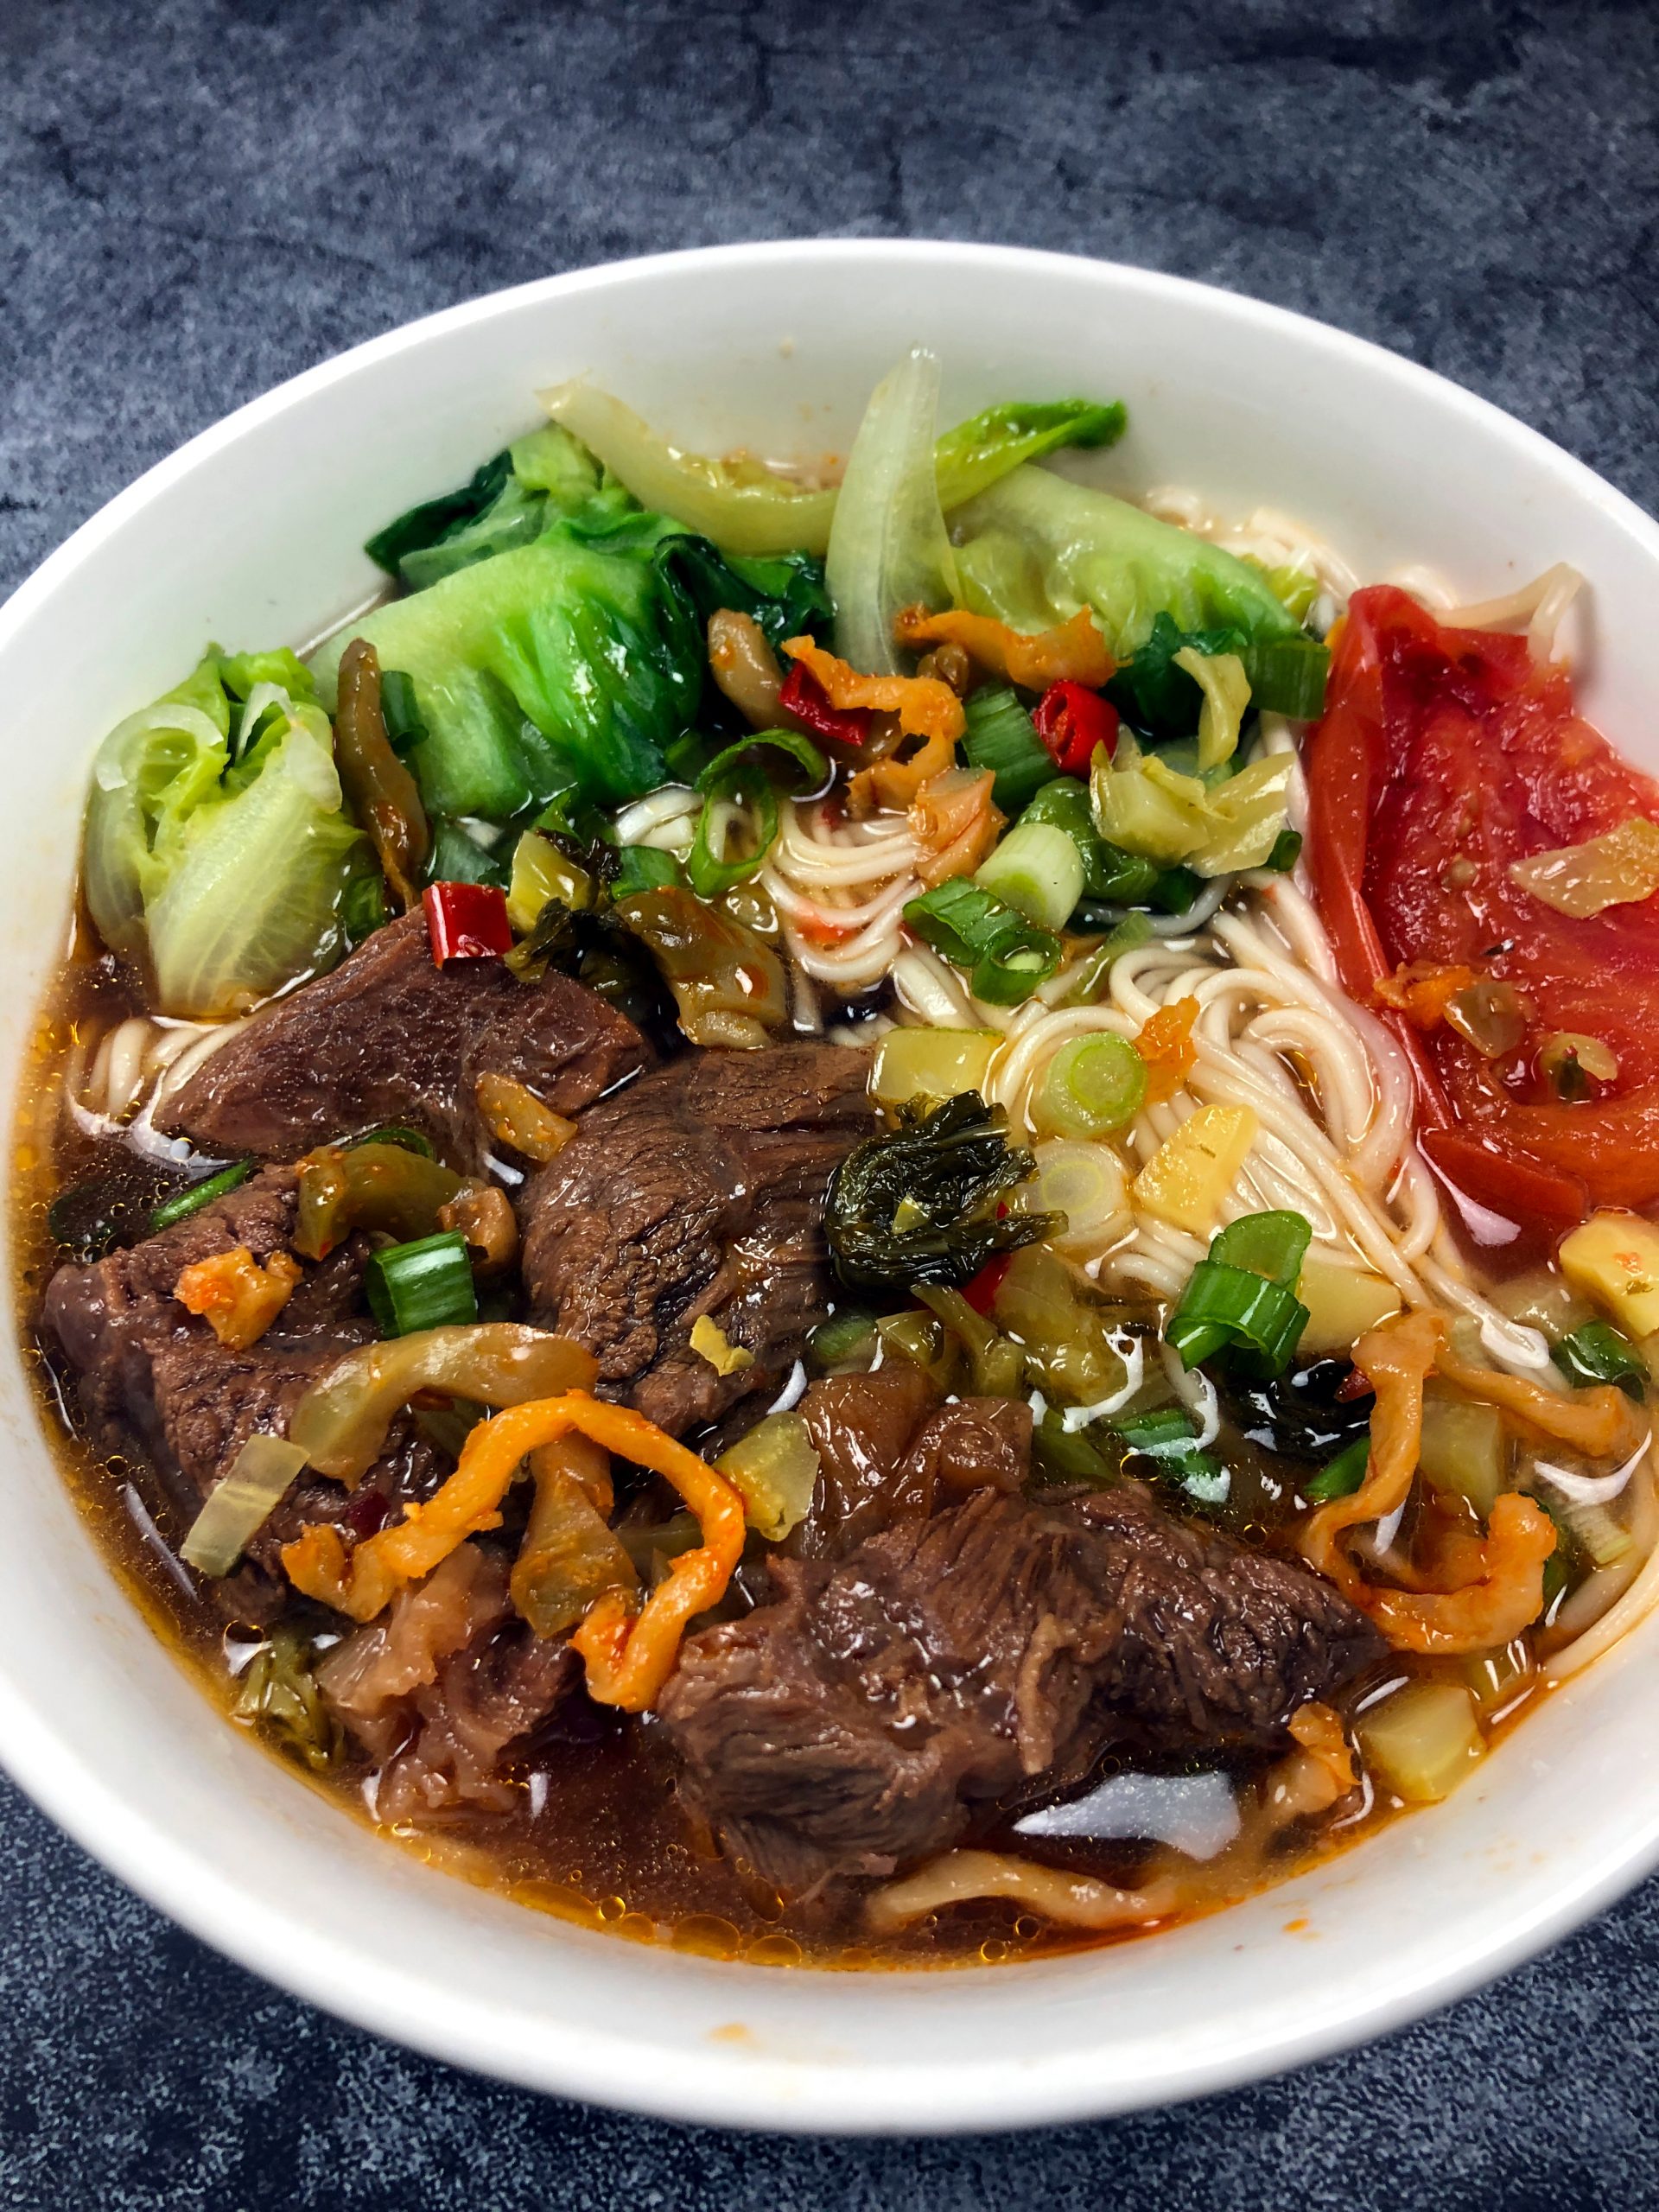 https://ohsnapletseat.com/wp-content/uploads/2021/09/taiwanese-beef-noodle-soup-3-1-scaled.jpg